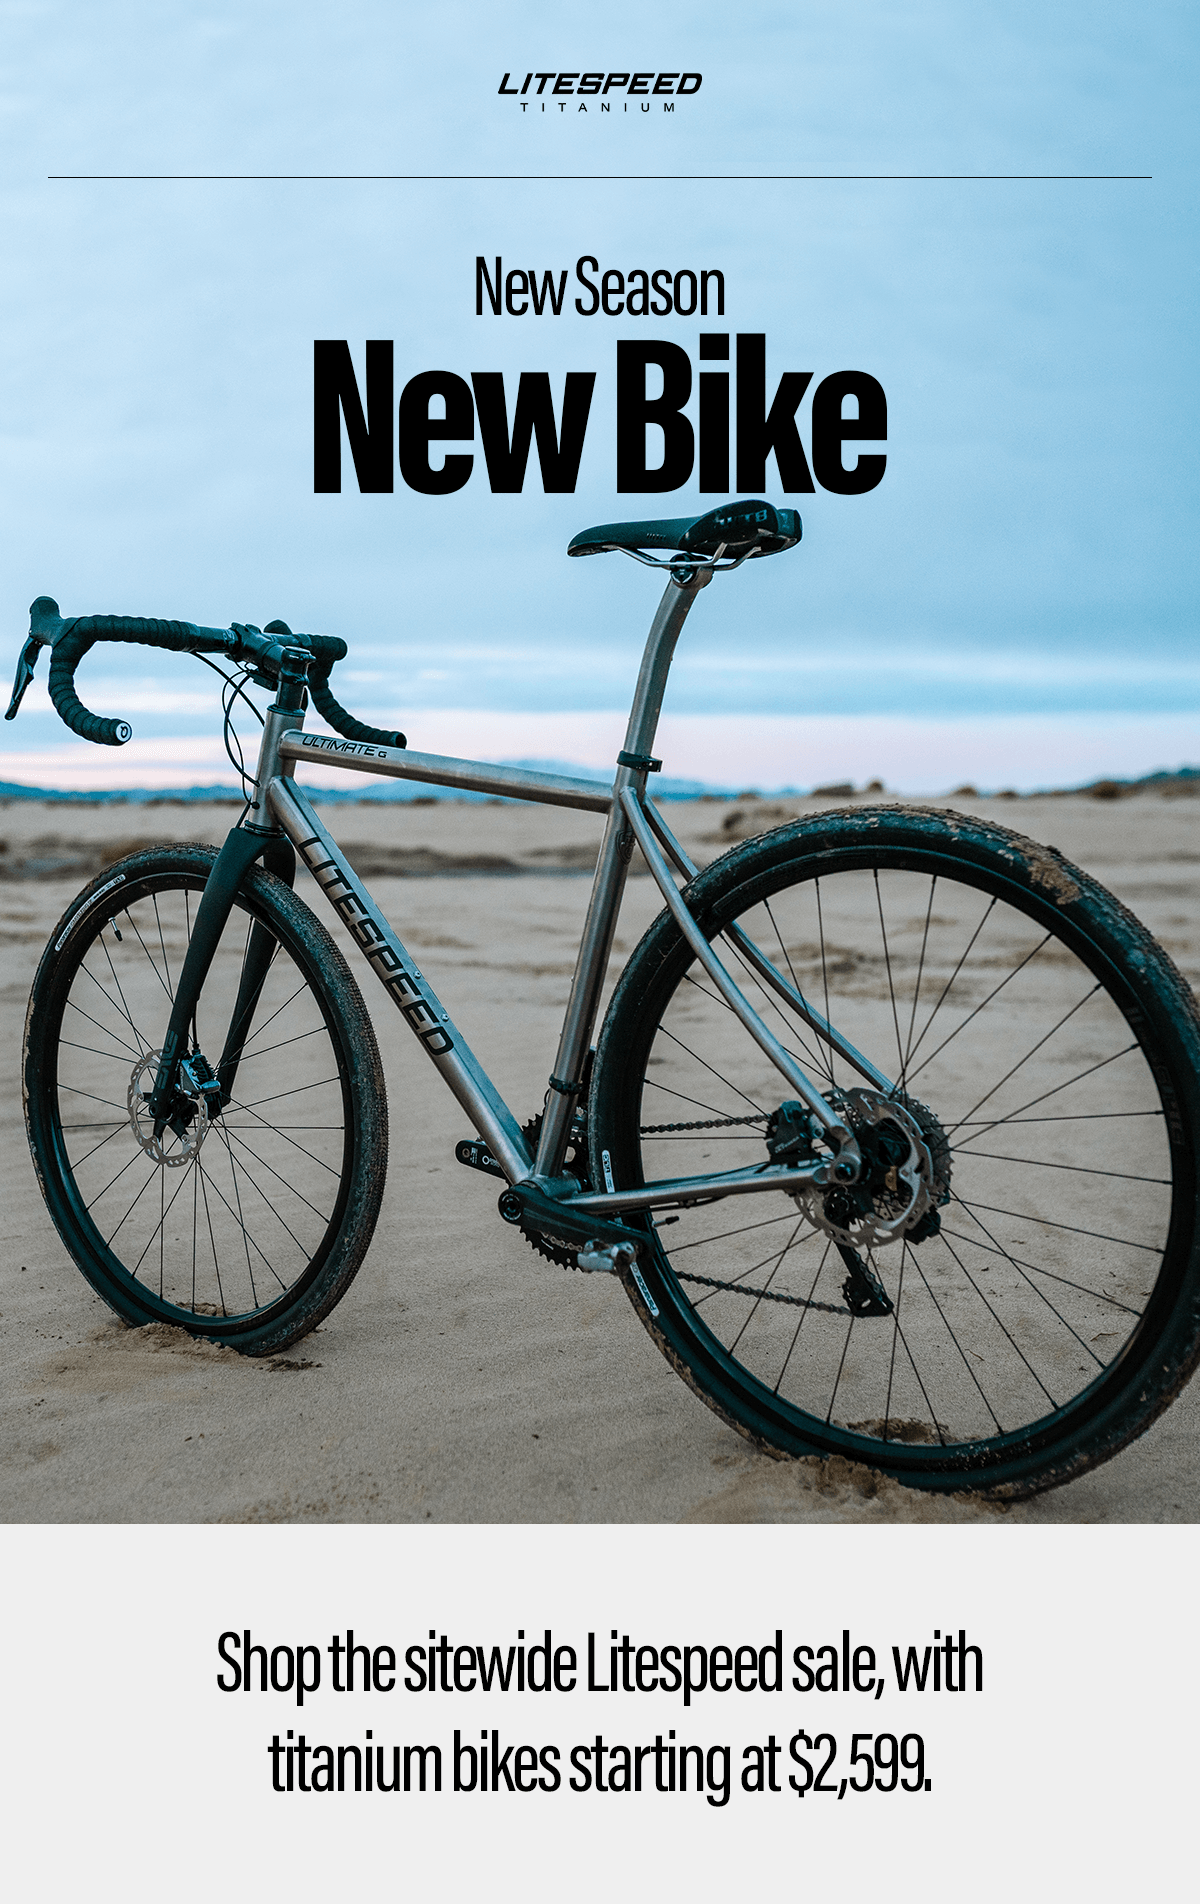 New Season, New Bike: Shop the sitewide Litespeed sale, with titanium bikes starting at $2,599.